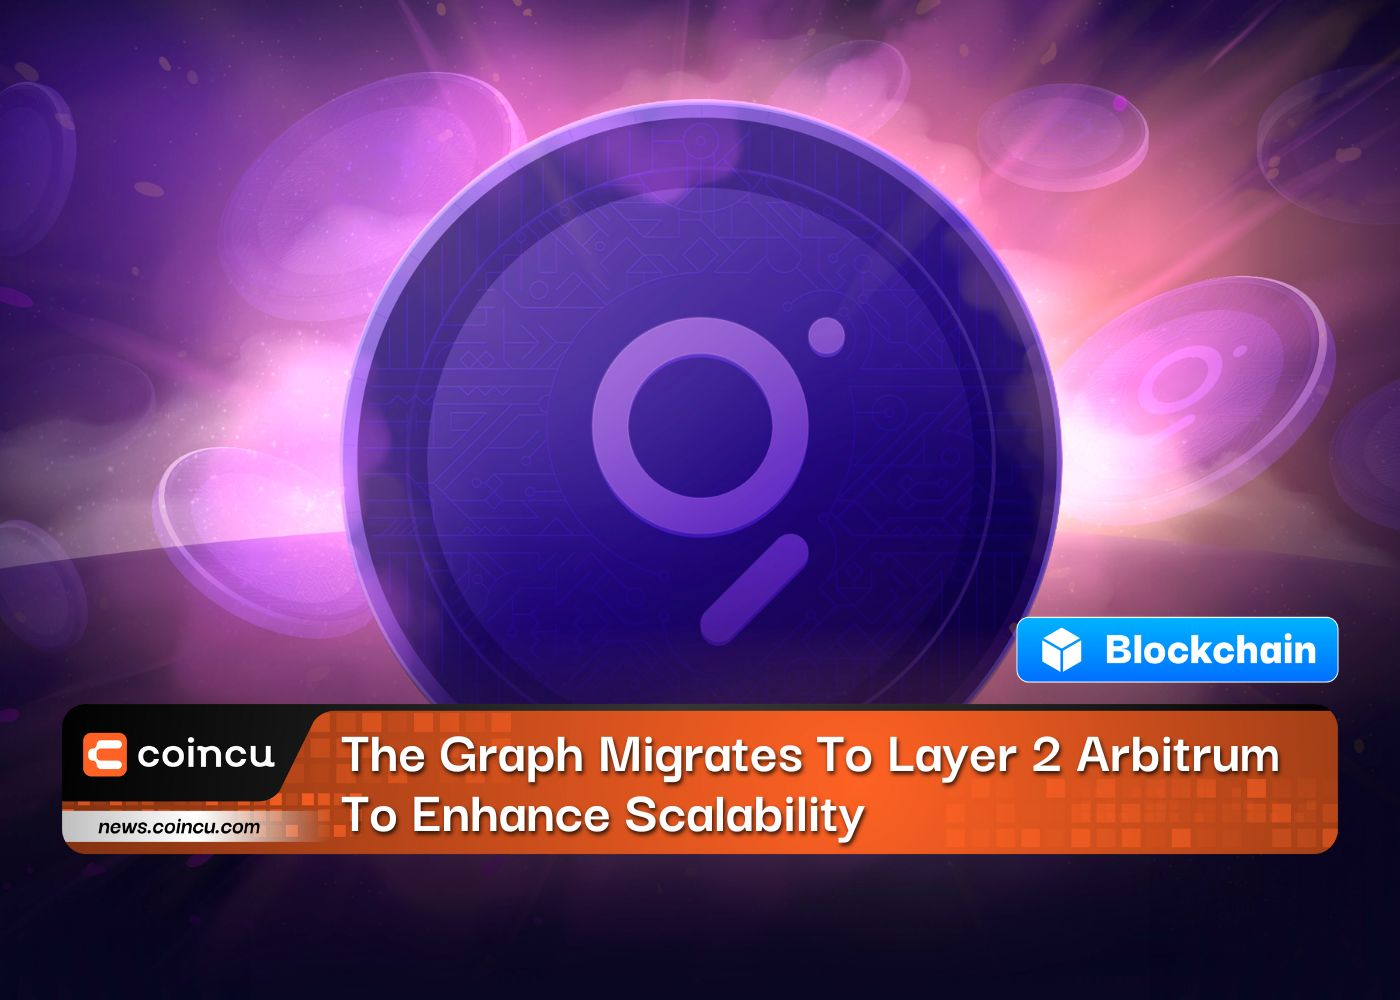 The Graph Migrates To Layer 2 Arbitrum To Enhance Scalability